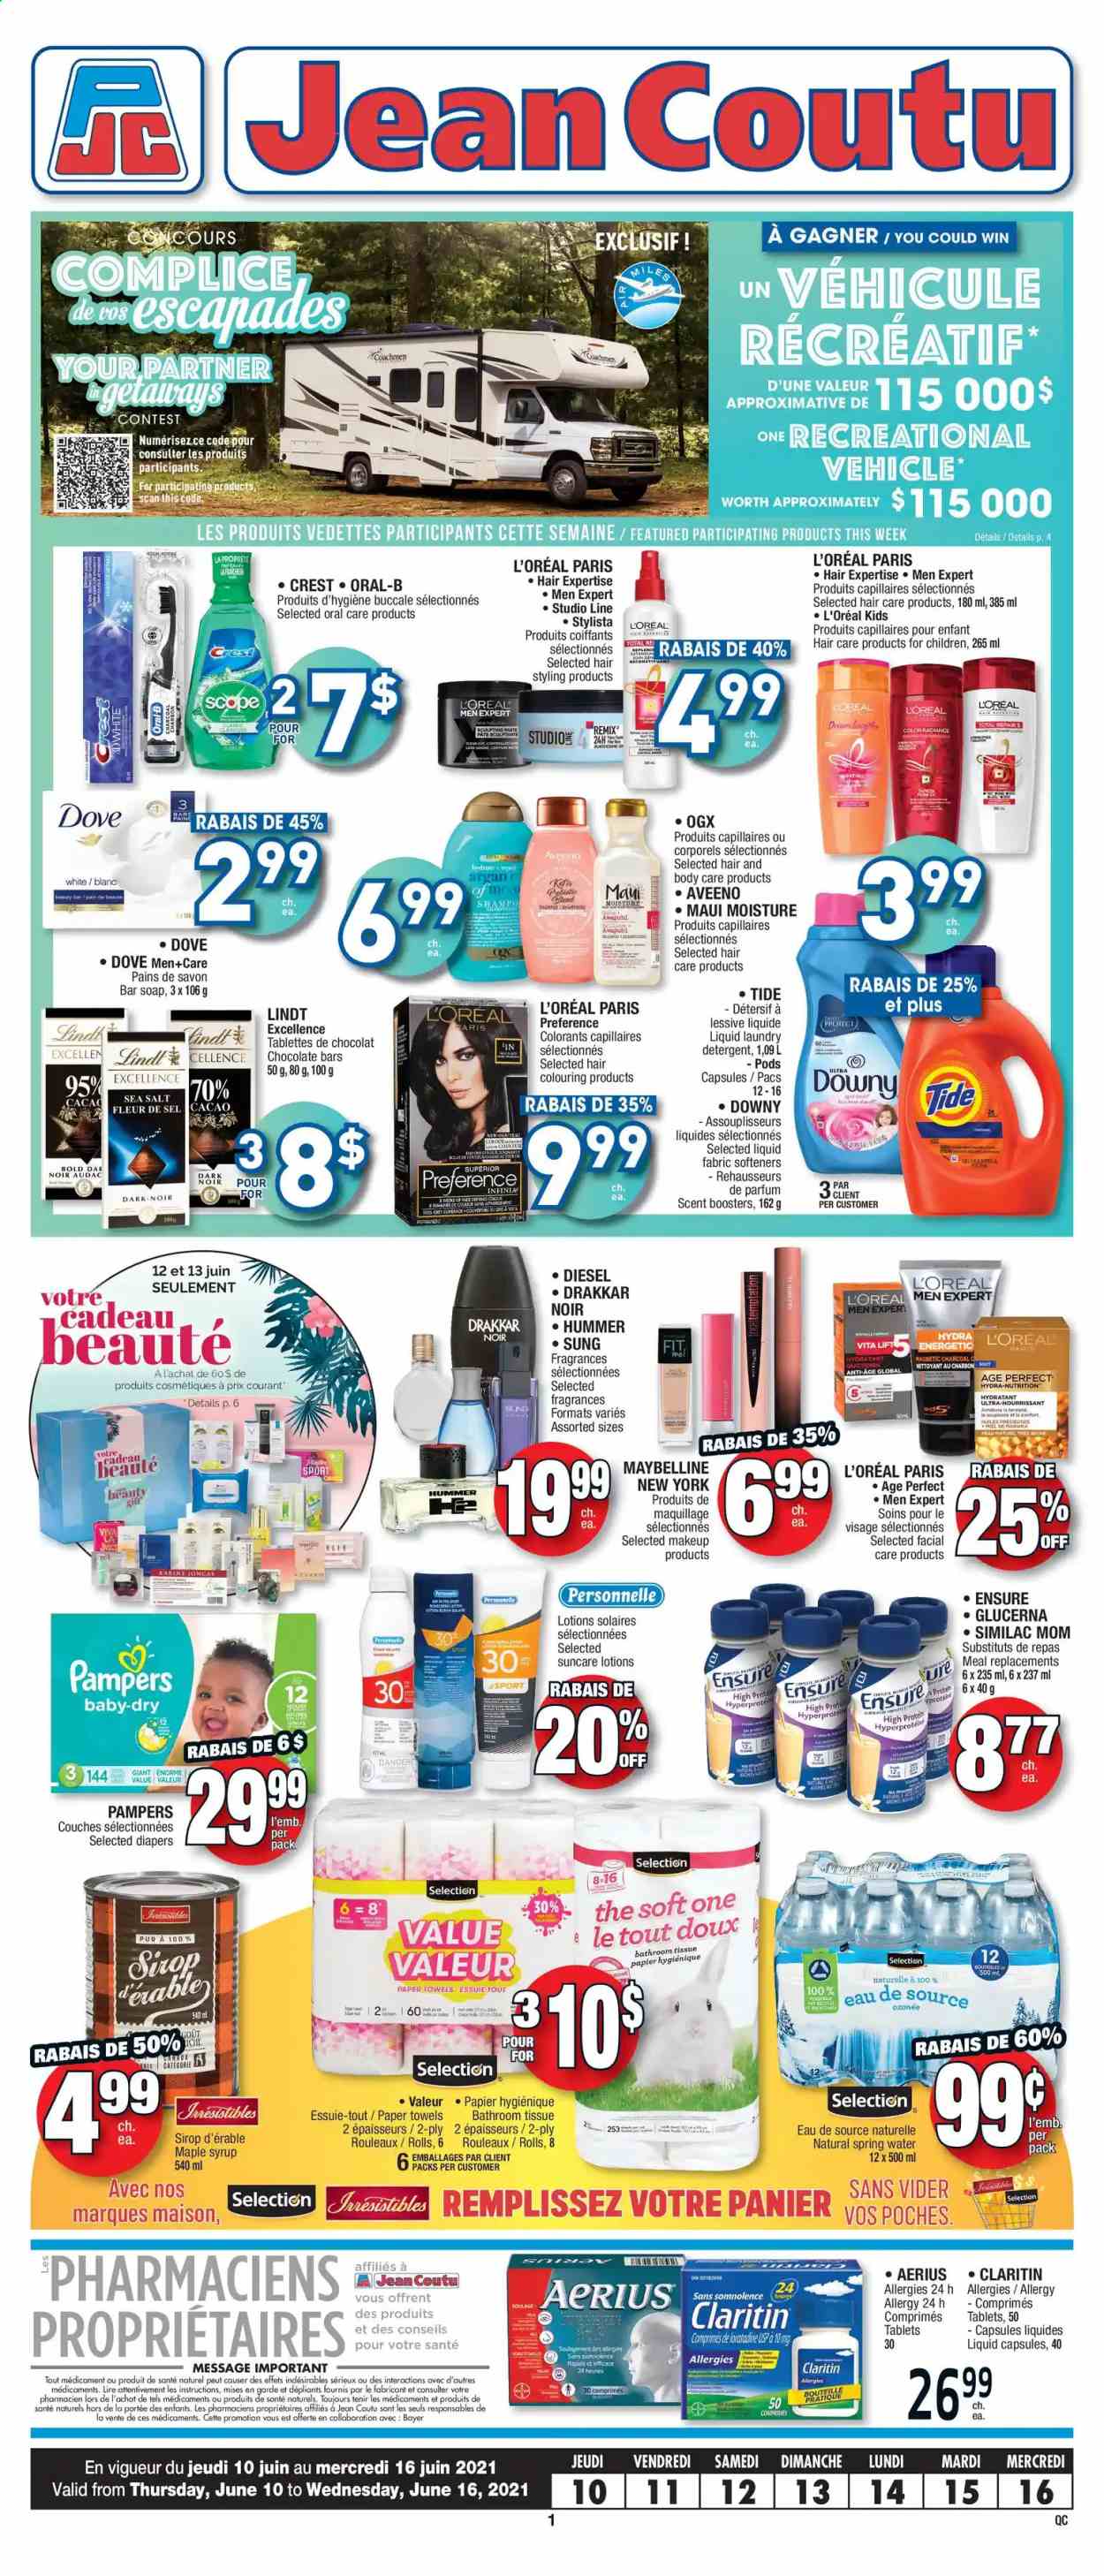 thumbnail - Jean Coutu Flyer - June 10, 2021 - June 16, 2021 - Sales products - chocolate bar, sea salt, maple syrup, syrup, spring water, nappies, Aveeno, bath tissue, kitchen towels, paper towels, Tide, laundry detergent, scent booster, soap bar, soap, Crest, L’Oréal, L’Oréal Men, OGX, Maui Moisture, makeup, vehicle, Glucerna, Bayer, Maybelline, Pampers, Oral-B. Page 1.